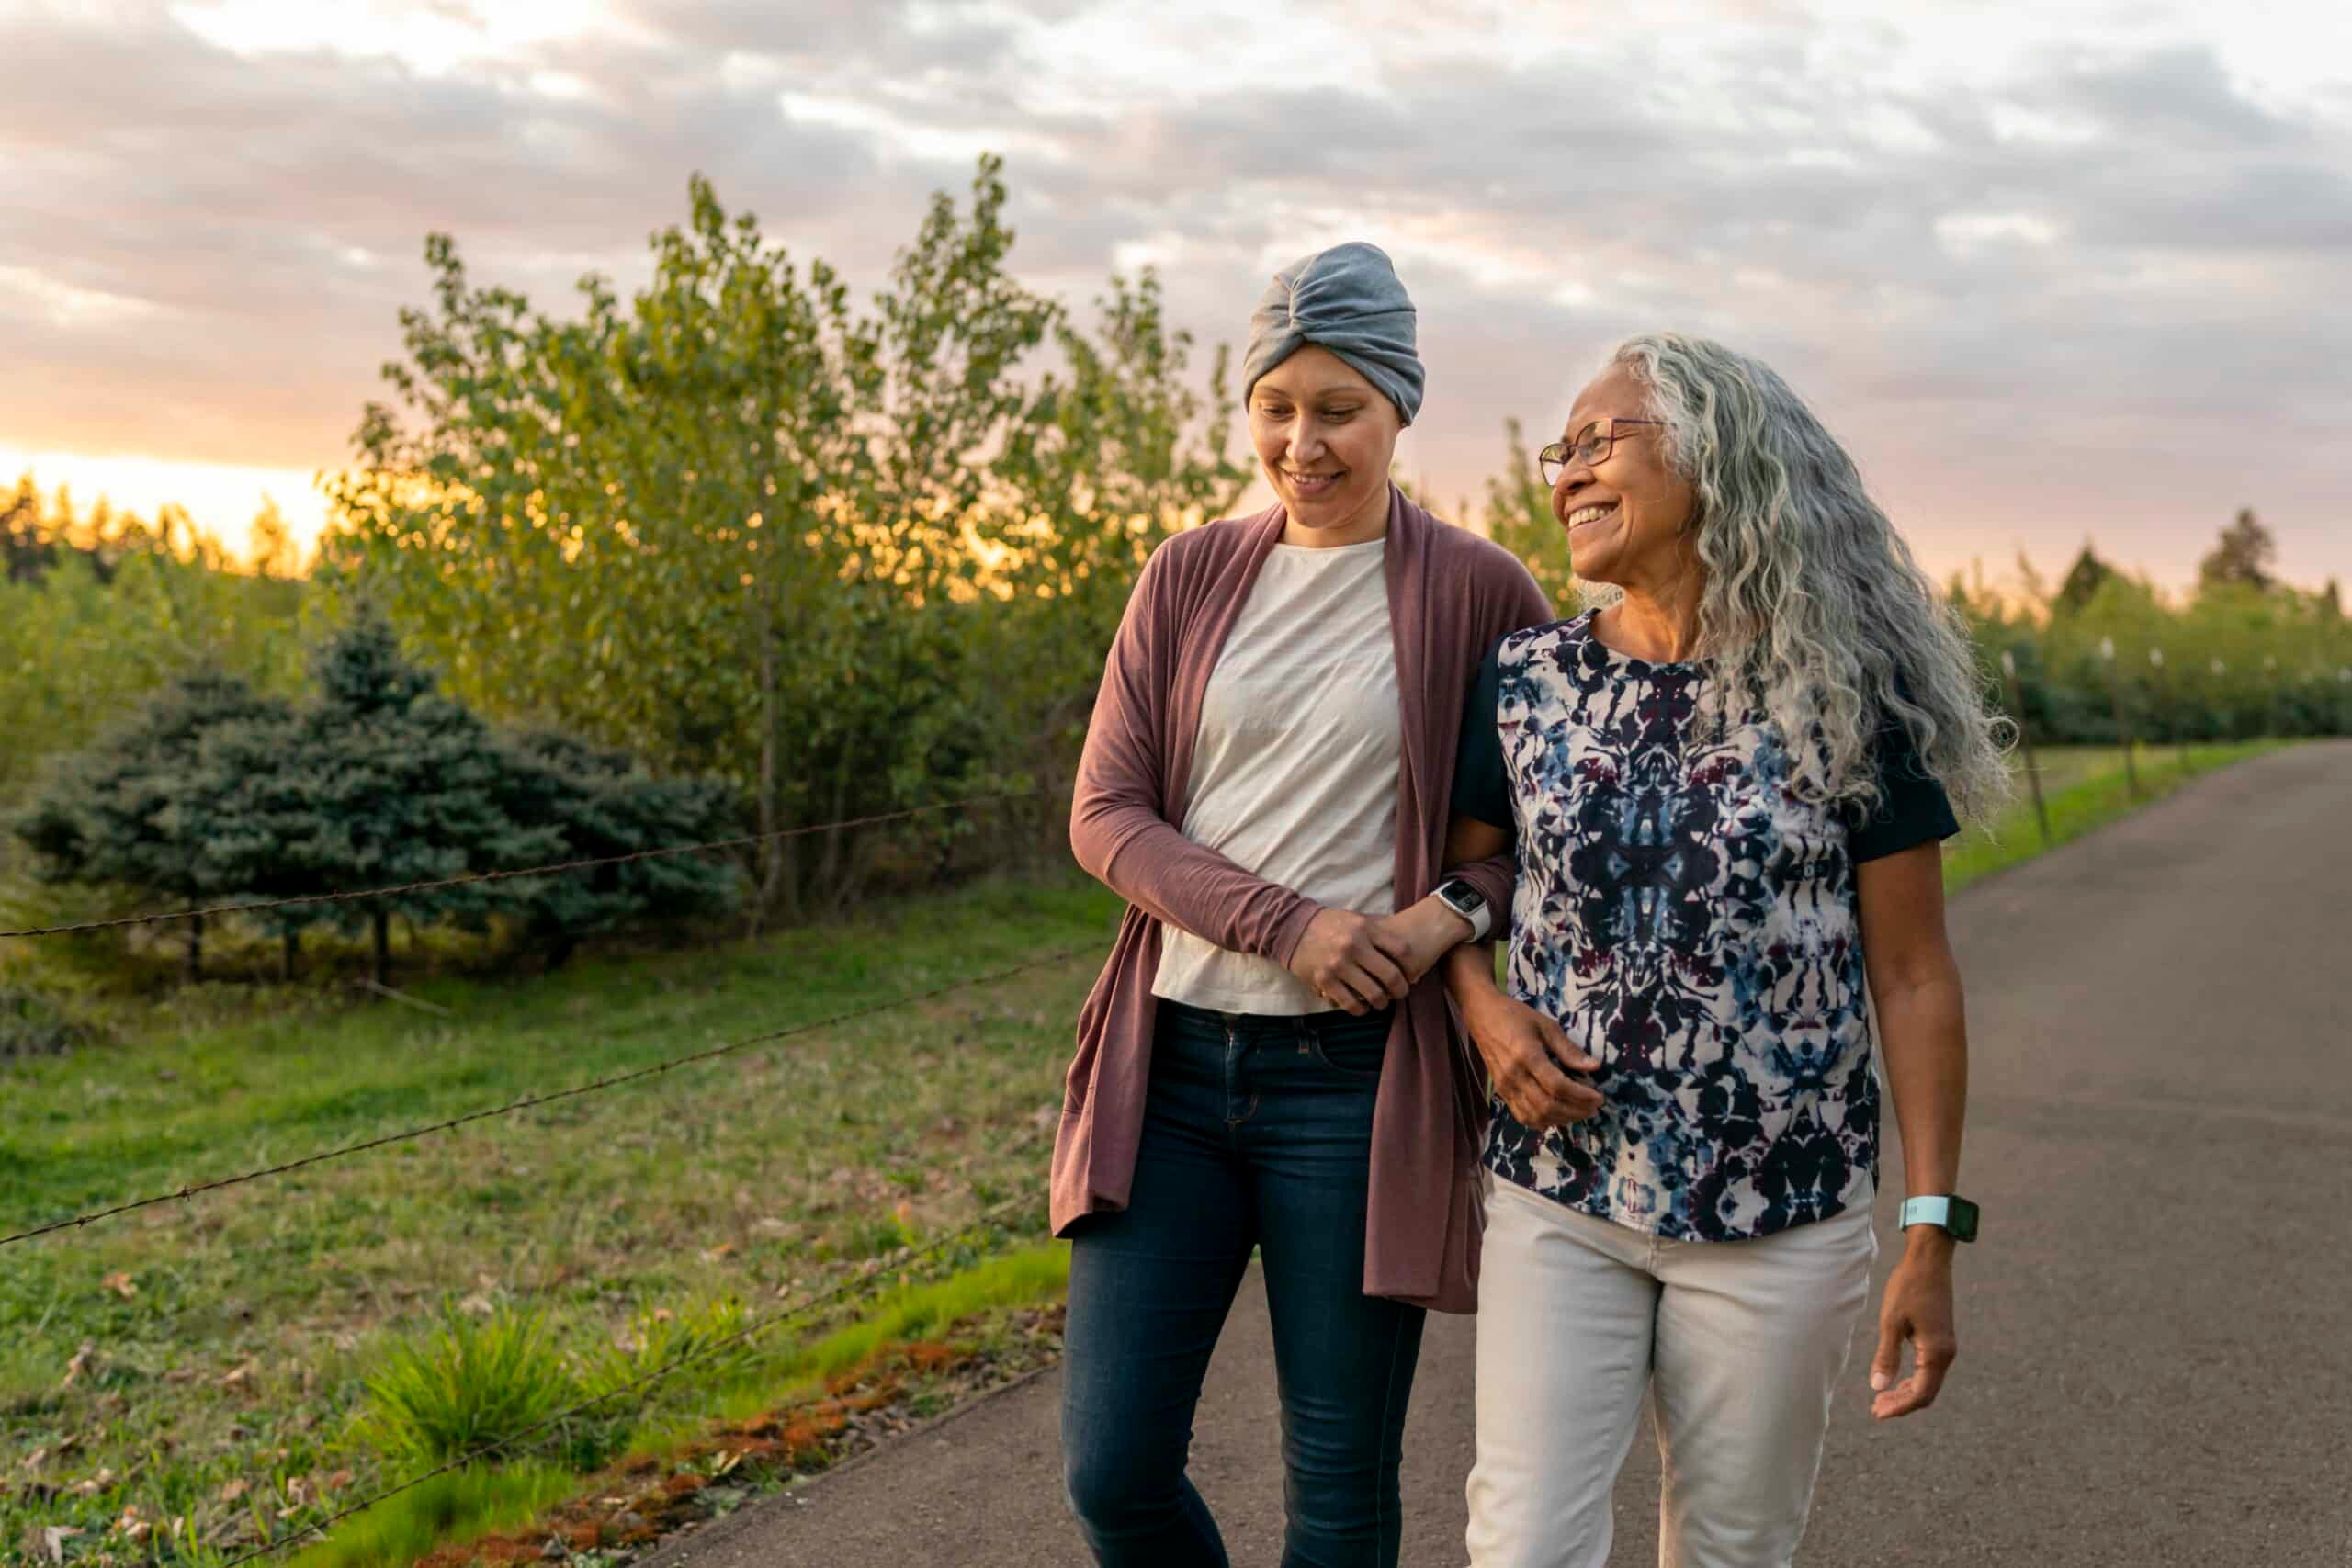 A young mixed race woman recovering from cancer walks arm in arm with her senior mother. They are enjoying the outdoors and time together. They are walking down a rural road at sunset.